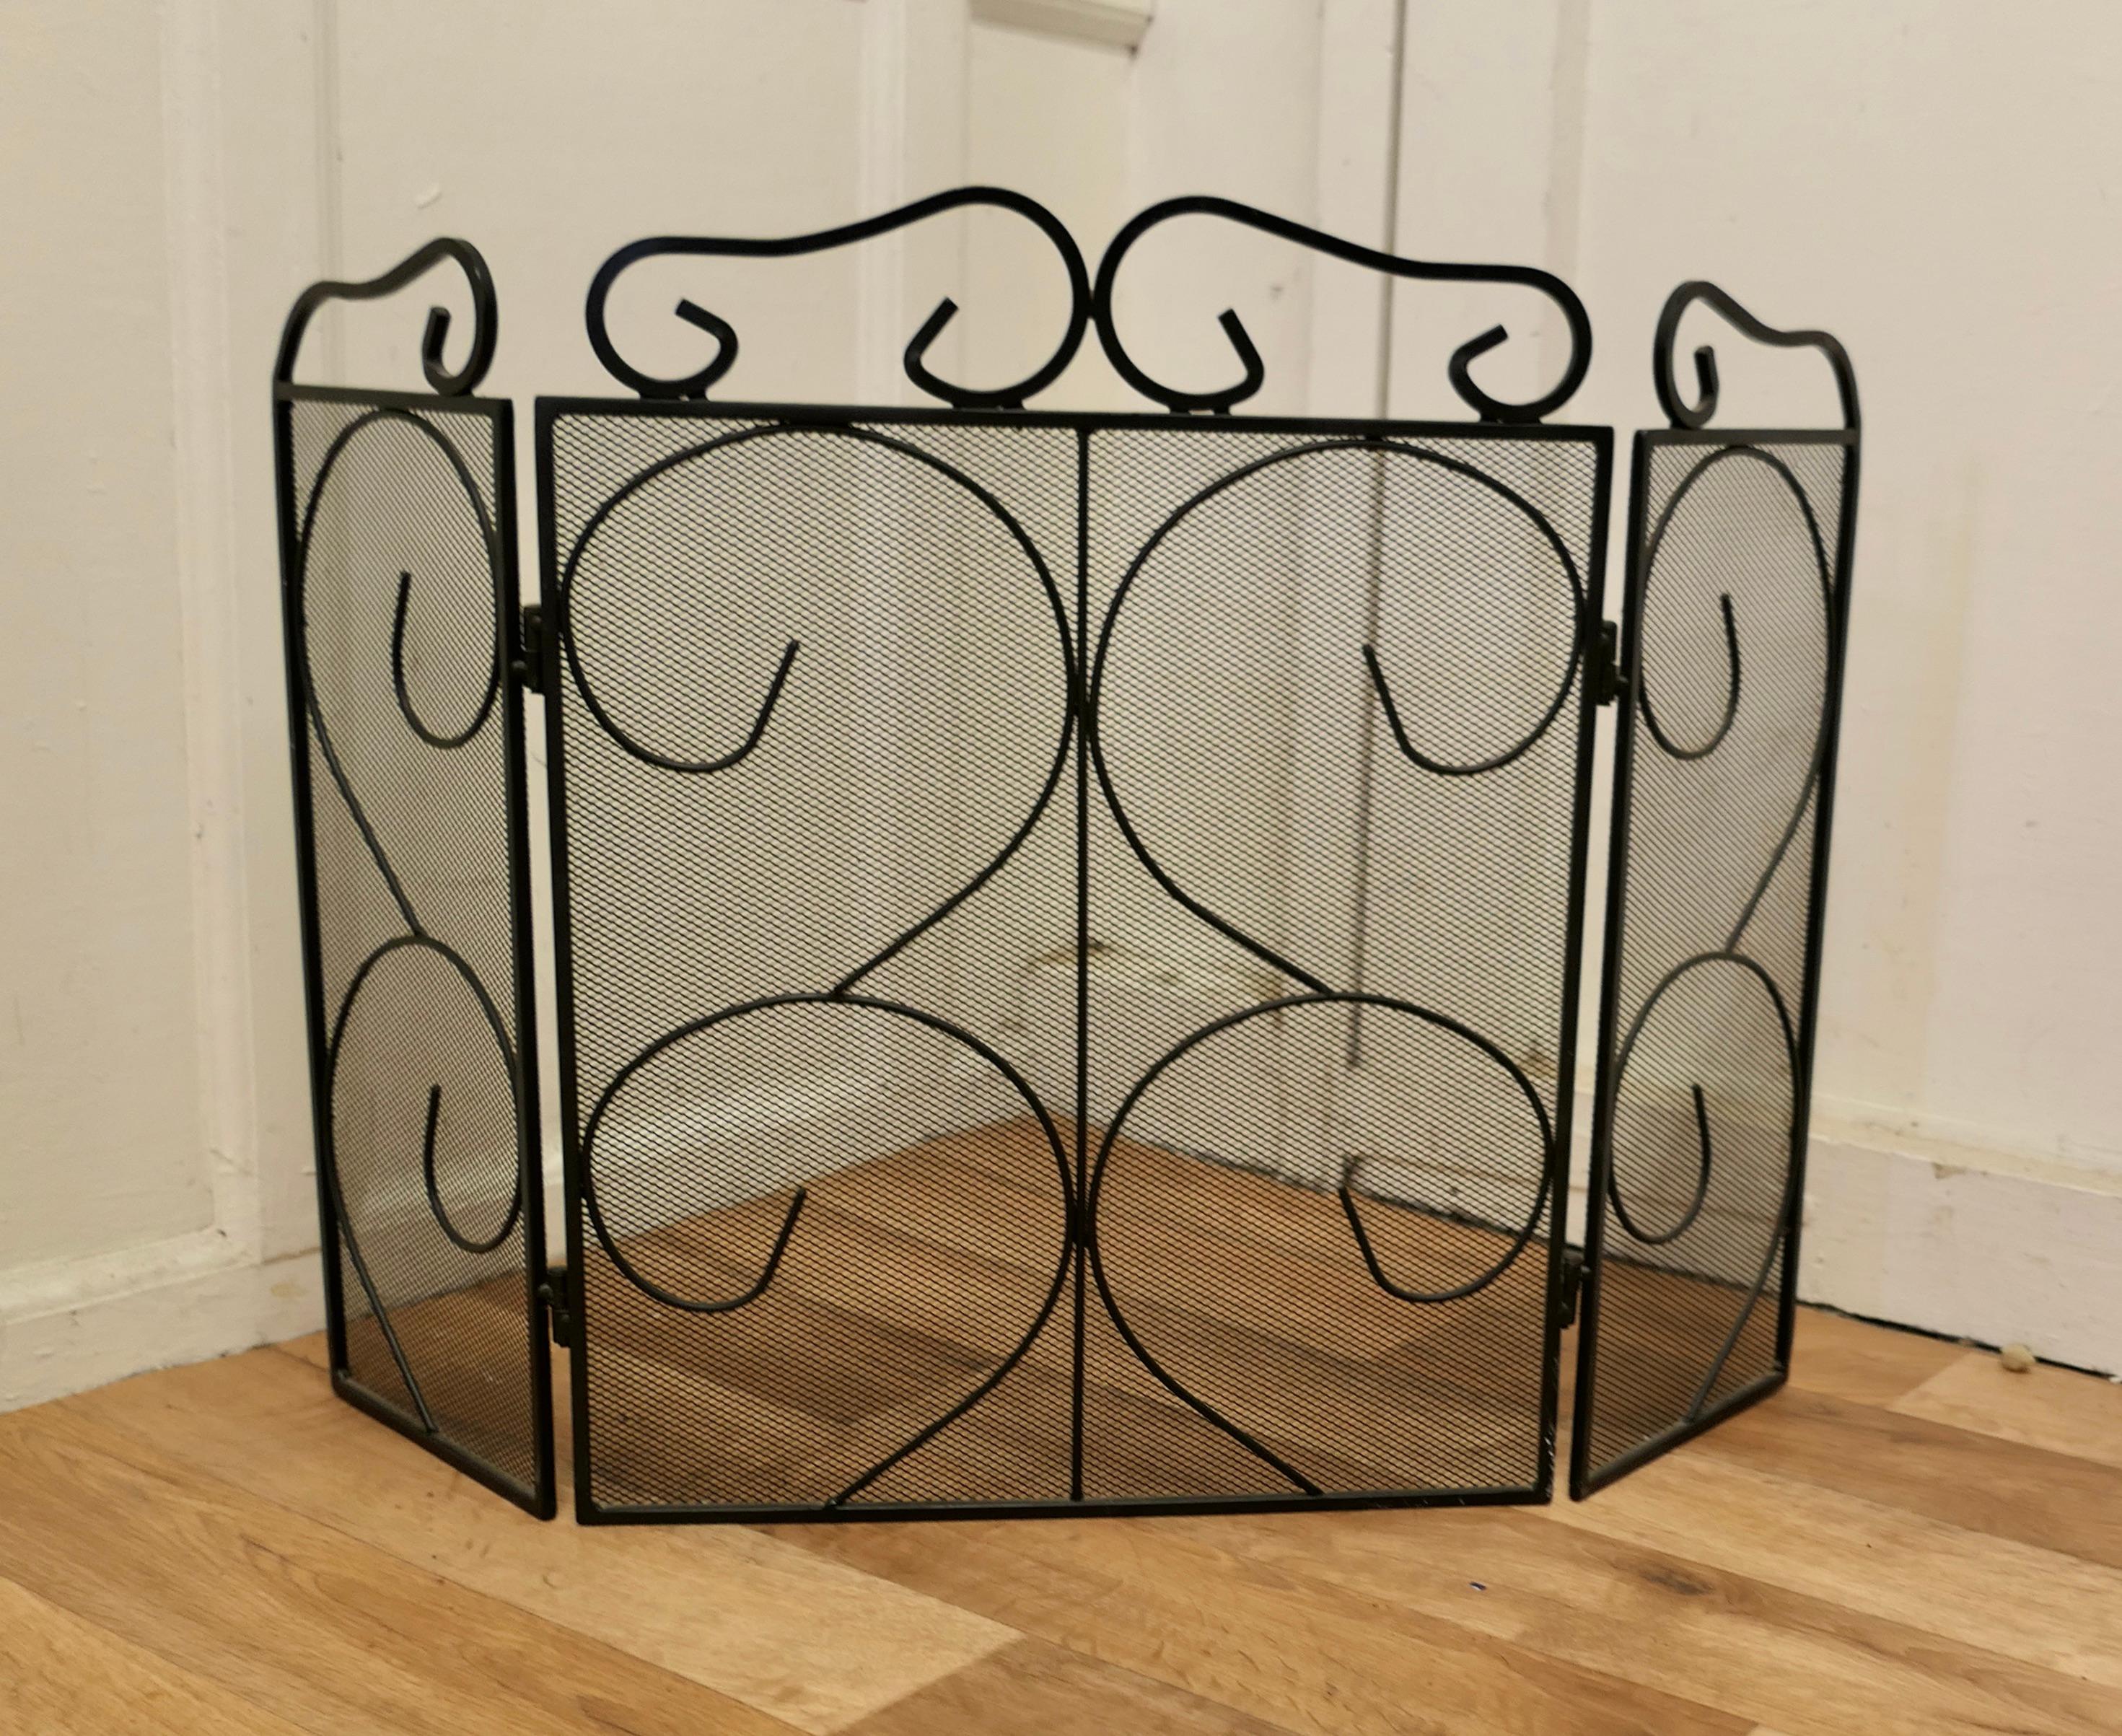 Folding Wrought Iron Fire Guard for Inglenook Fireplace

This is a good Fireguard, it would suit a traditional Inglenook fireplace or any fire 
The guard has a decorative wrought iron decoration over heavy inset mesh 
The guard is in good